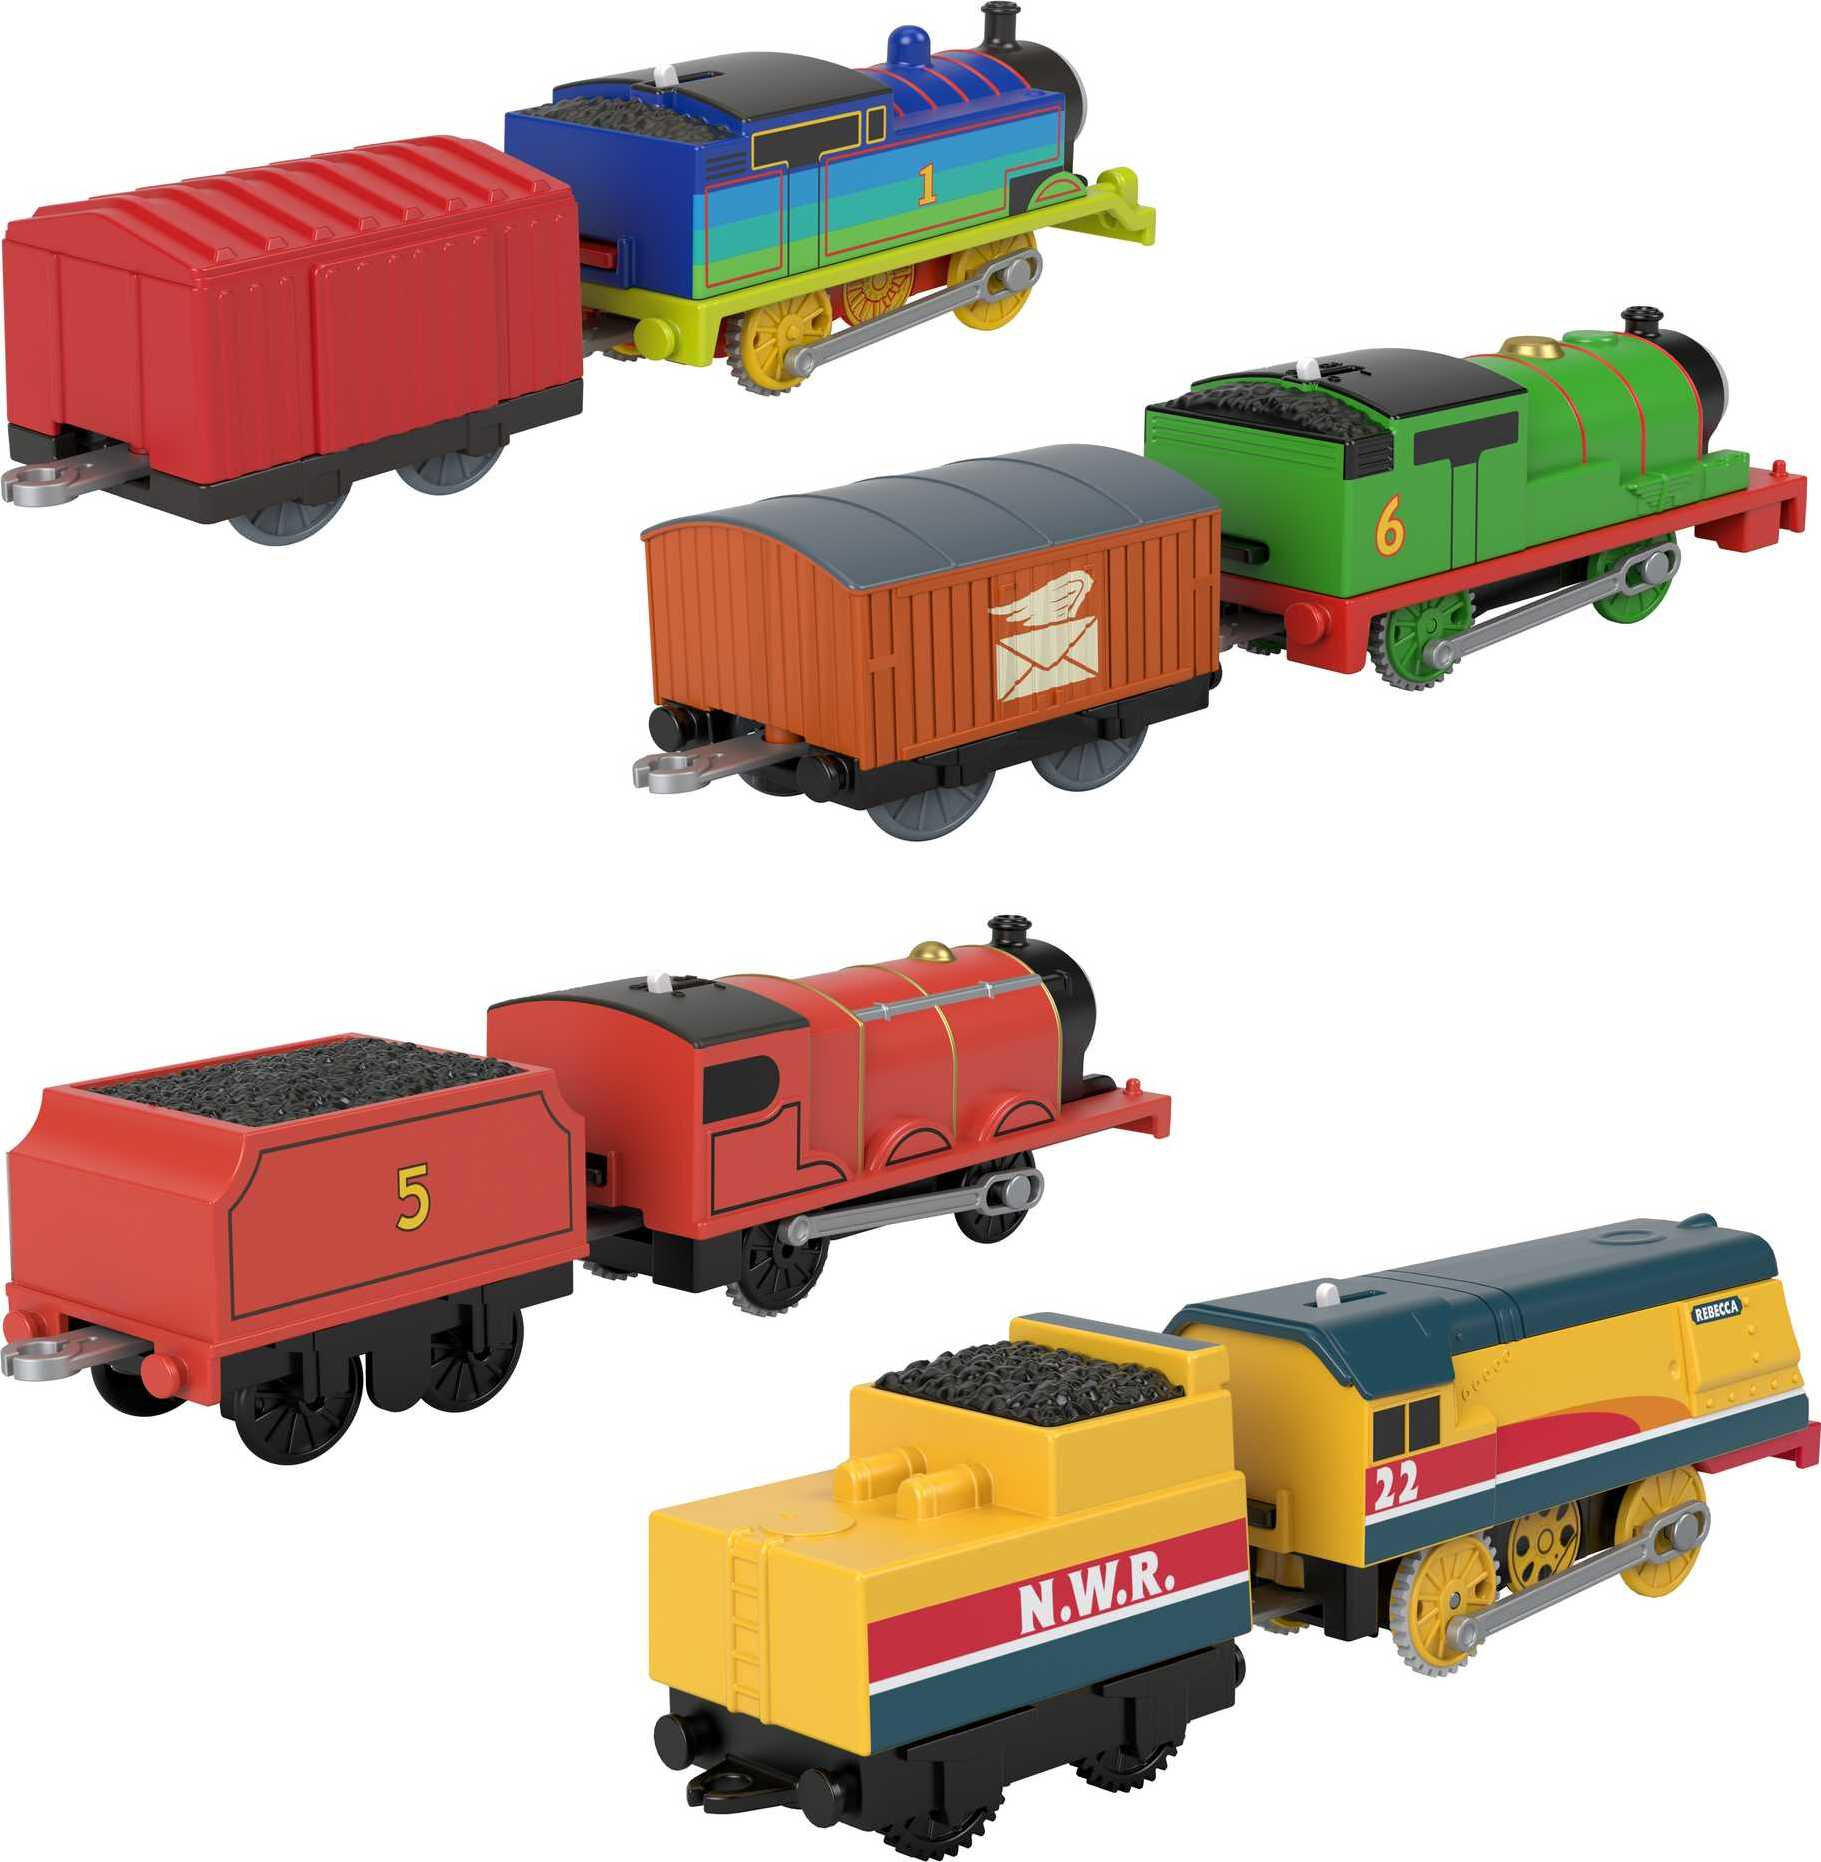 Thomas & Friends Thomas, Percy, James & Rebecca Motorized Toy Train Play Vehicle Pack, 4 Engines - image 5 of 6